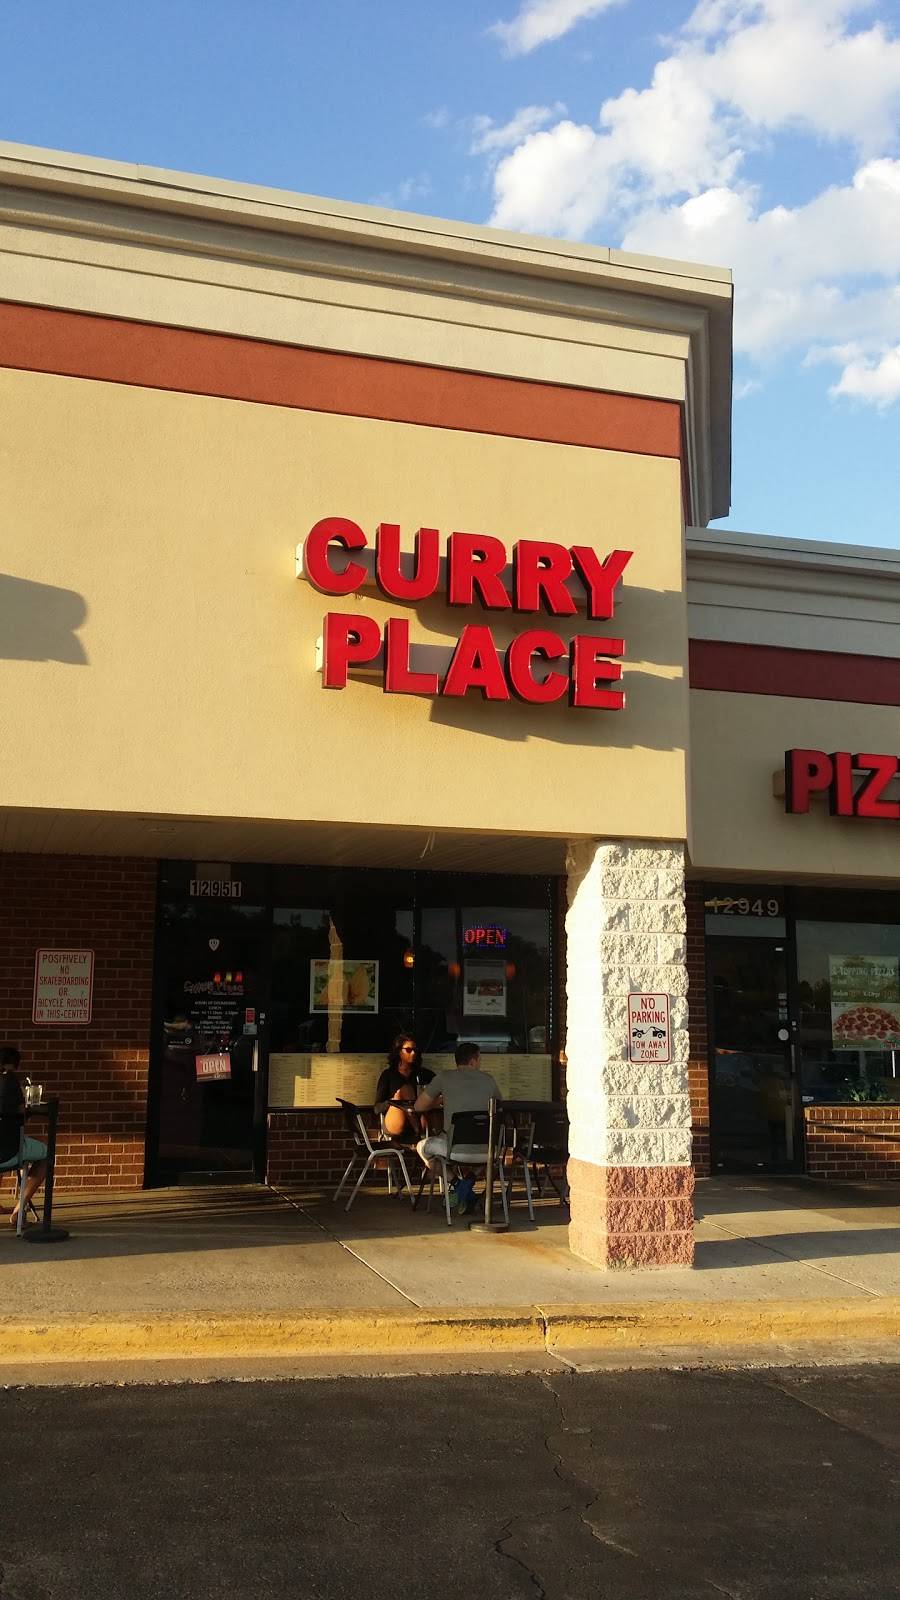 Curry Place Germantown | restaurant | 12951 Wisteria Dr, Germantown, MD 20874, USA | 3019721005 OR +1 301-972-1005